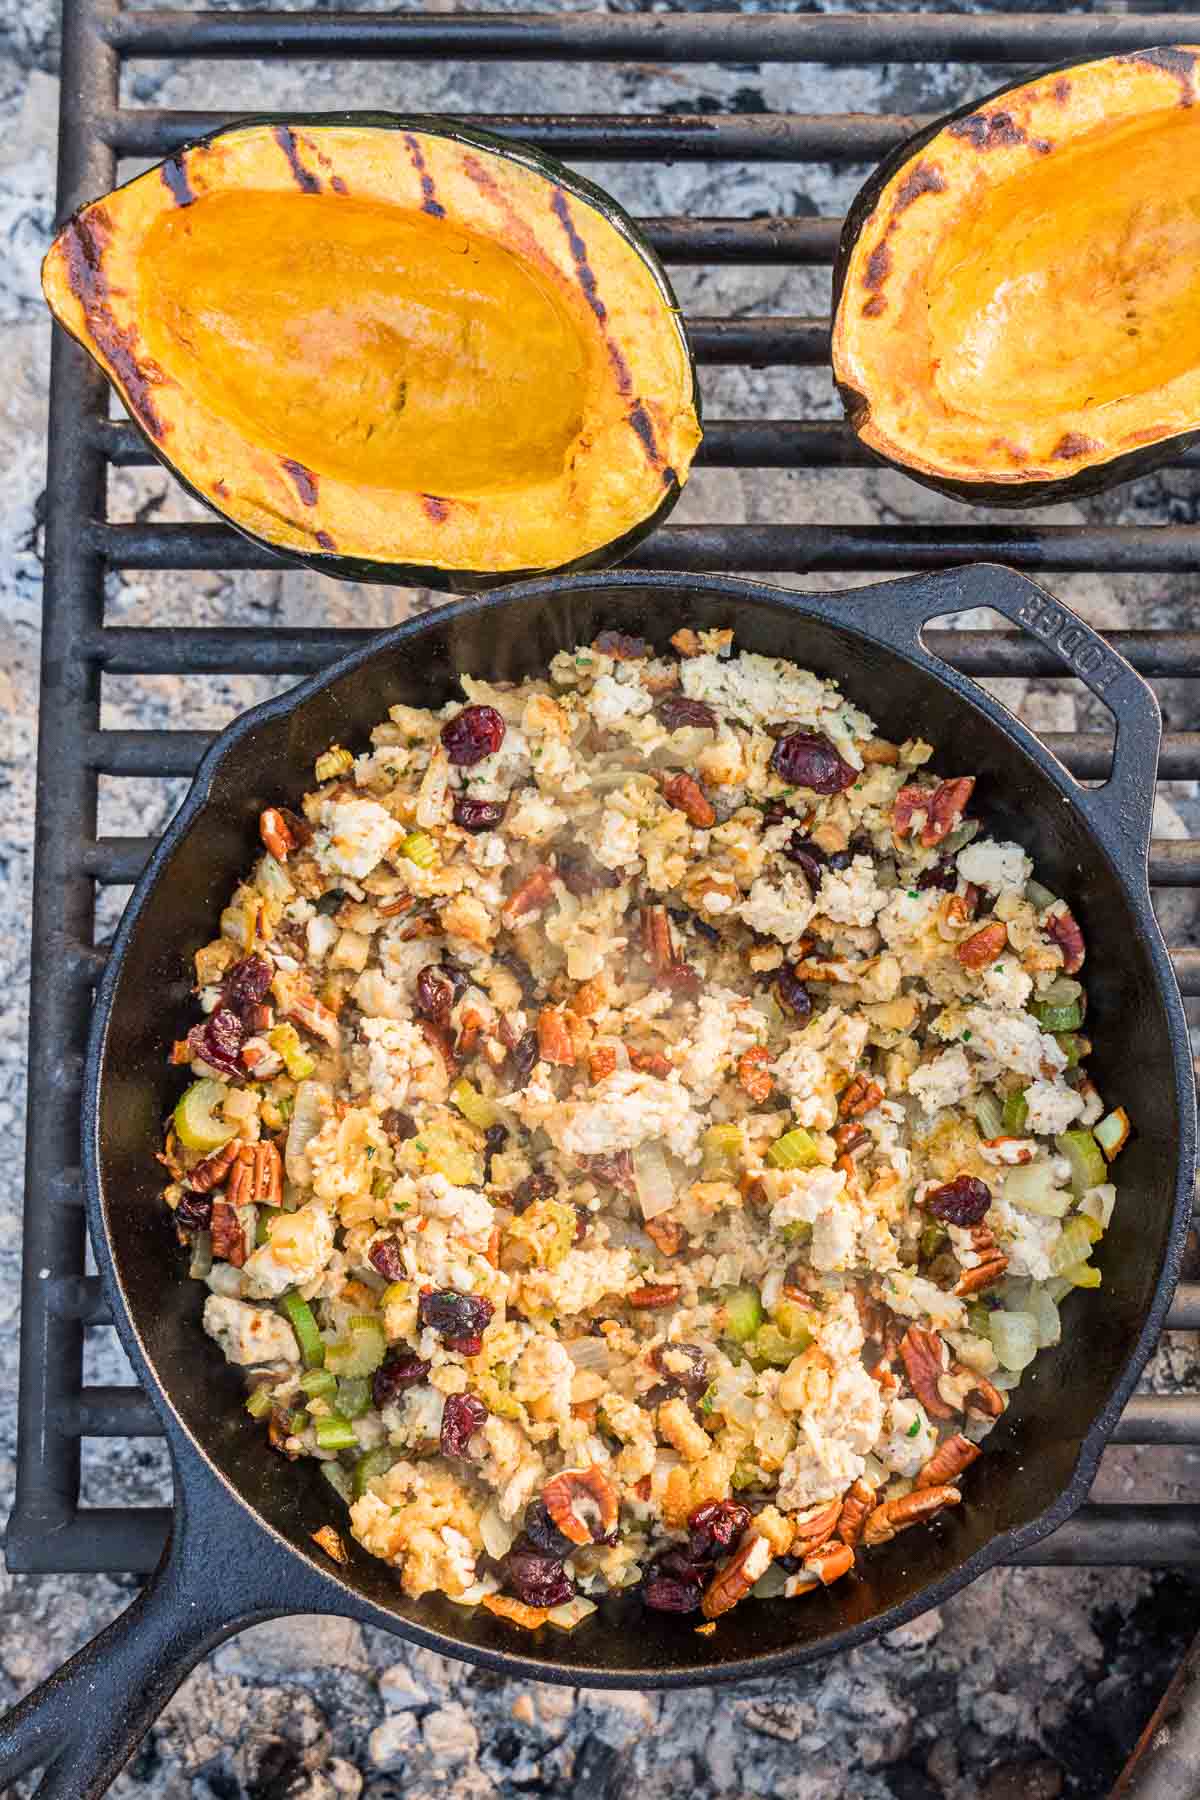 Fill a cast iron pan on a grill grate.